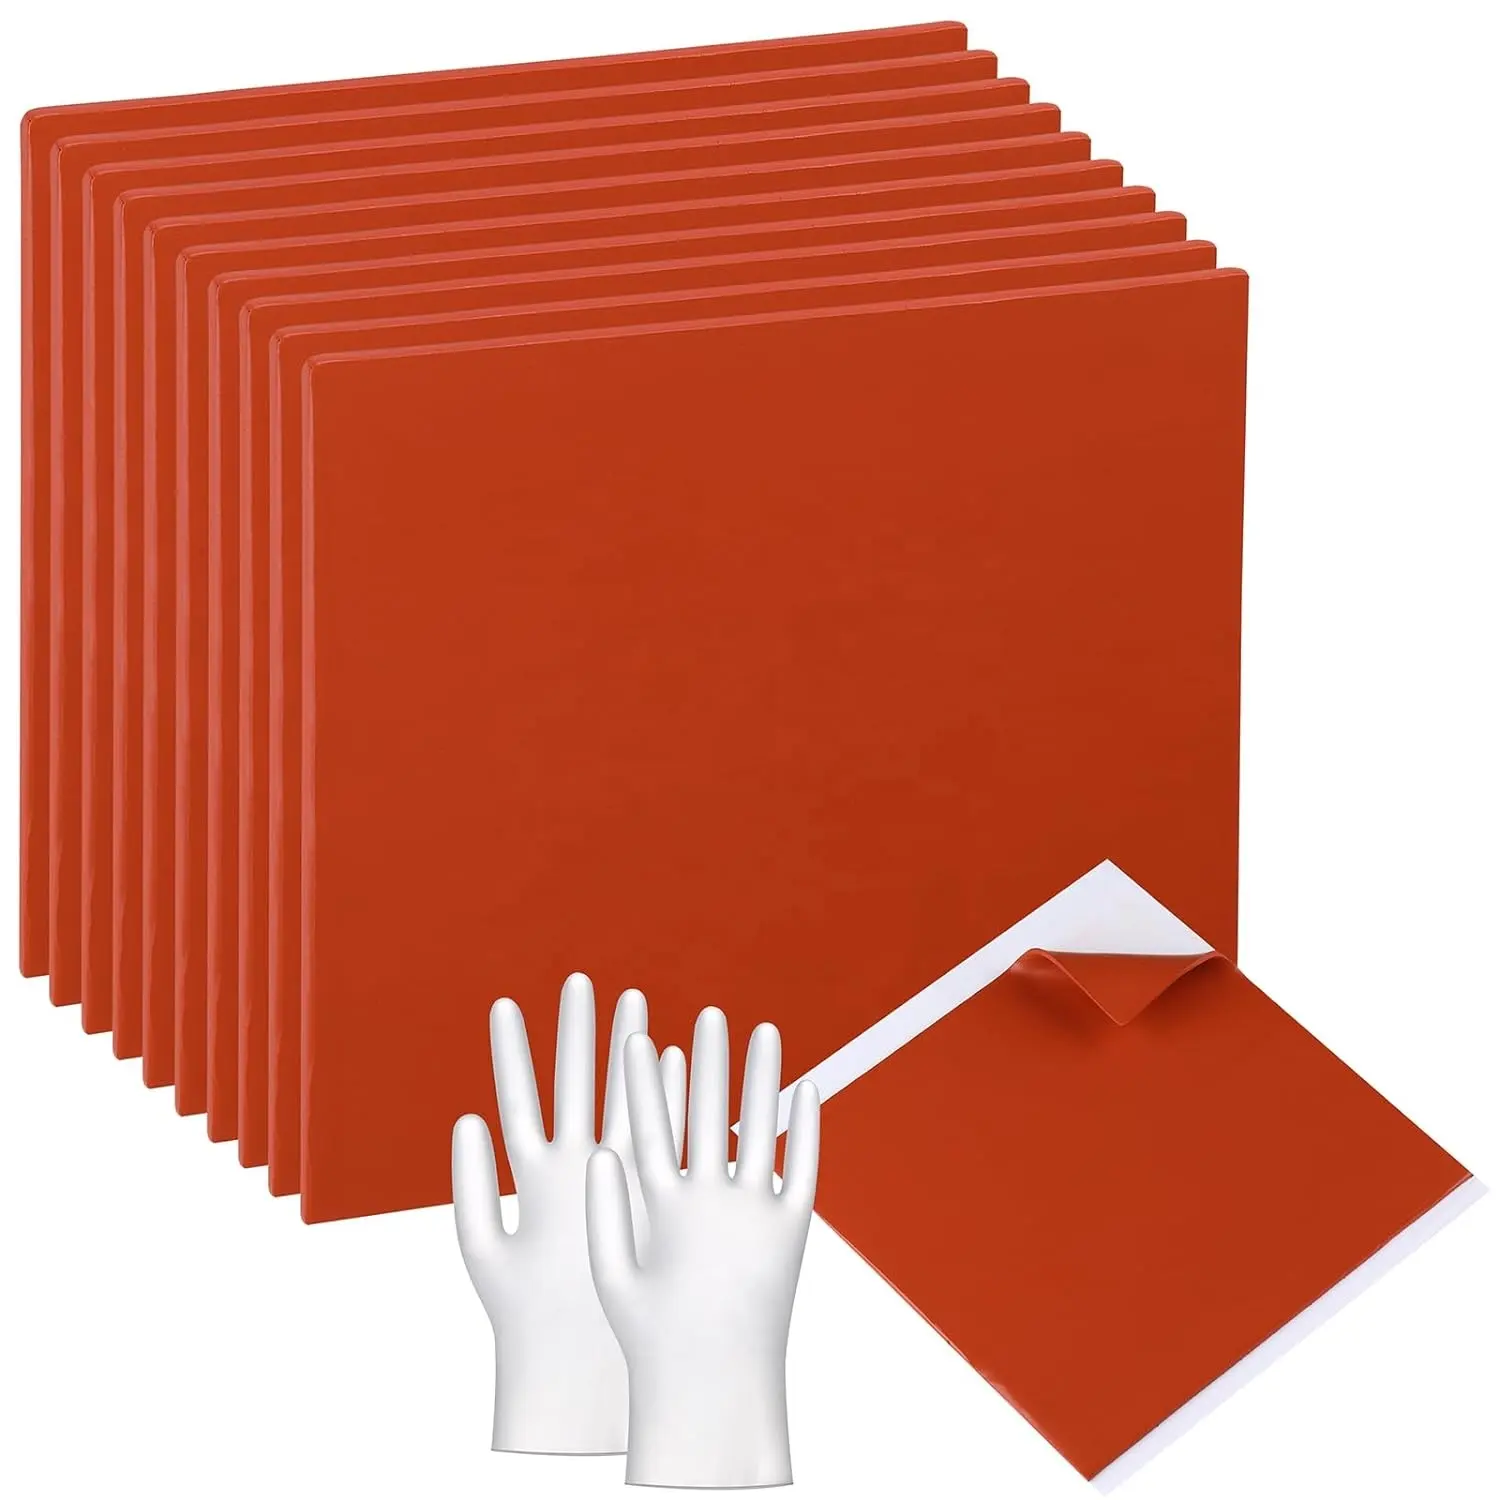 Fire putty pads for electrical boxes